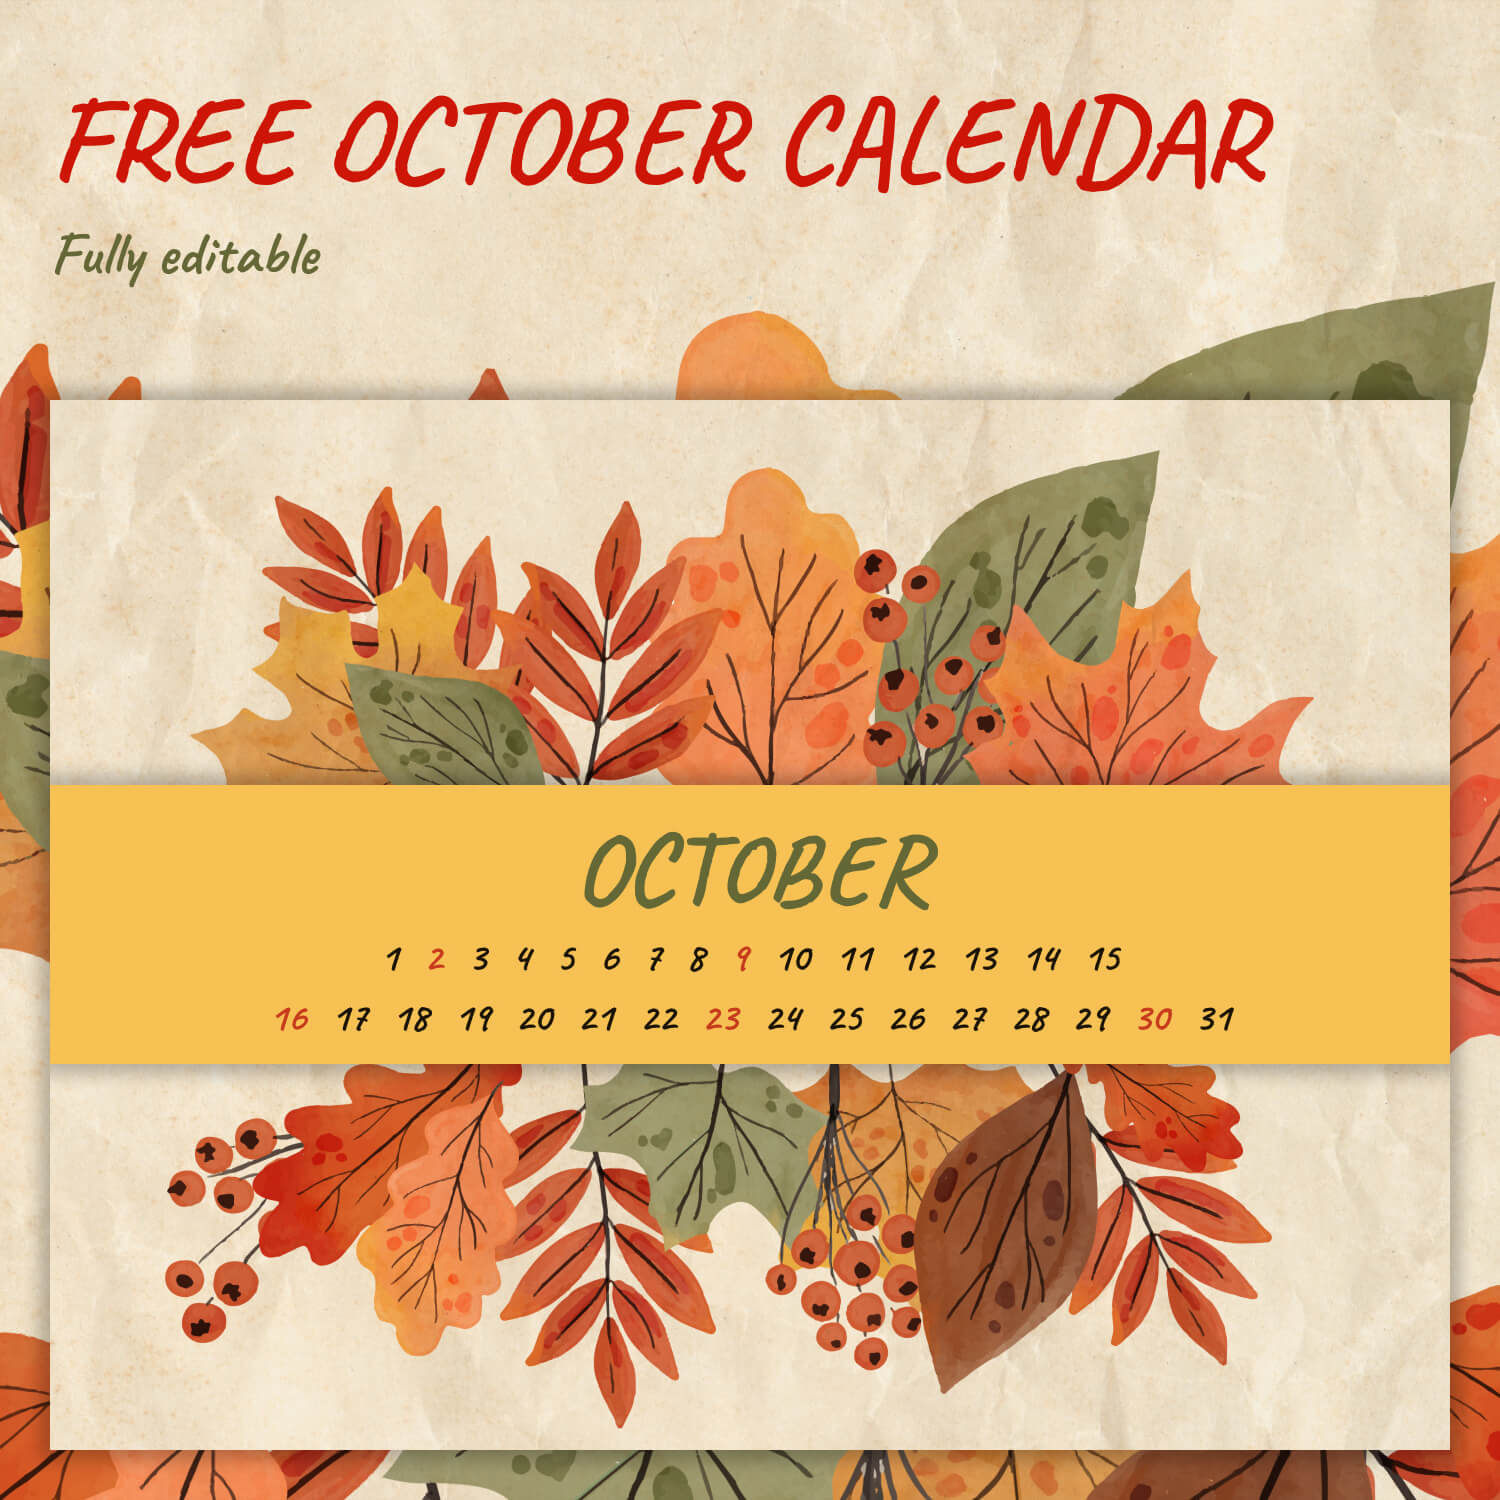 Free Leaves October Calendar cover image.